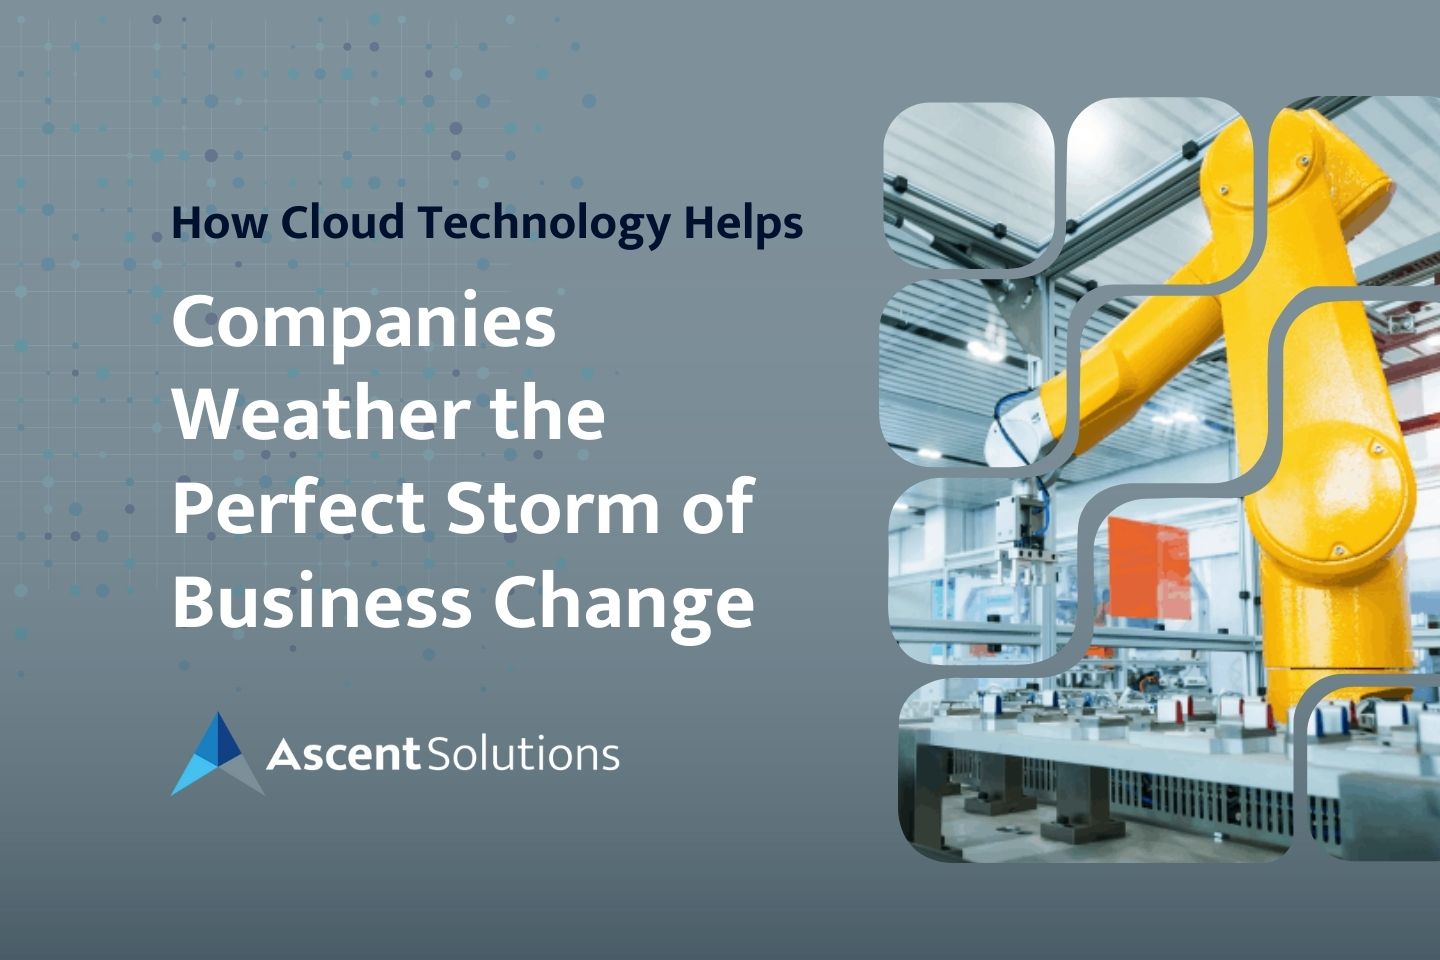 How Cloud Technology Helps Companies Weather the Perfect Storm of Business Change